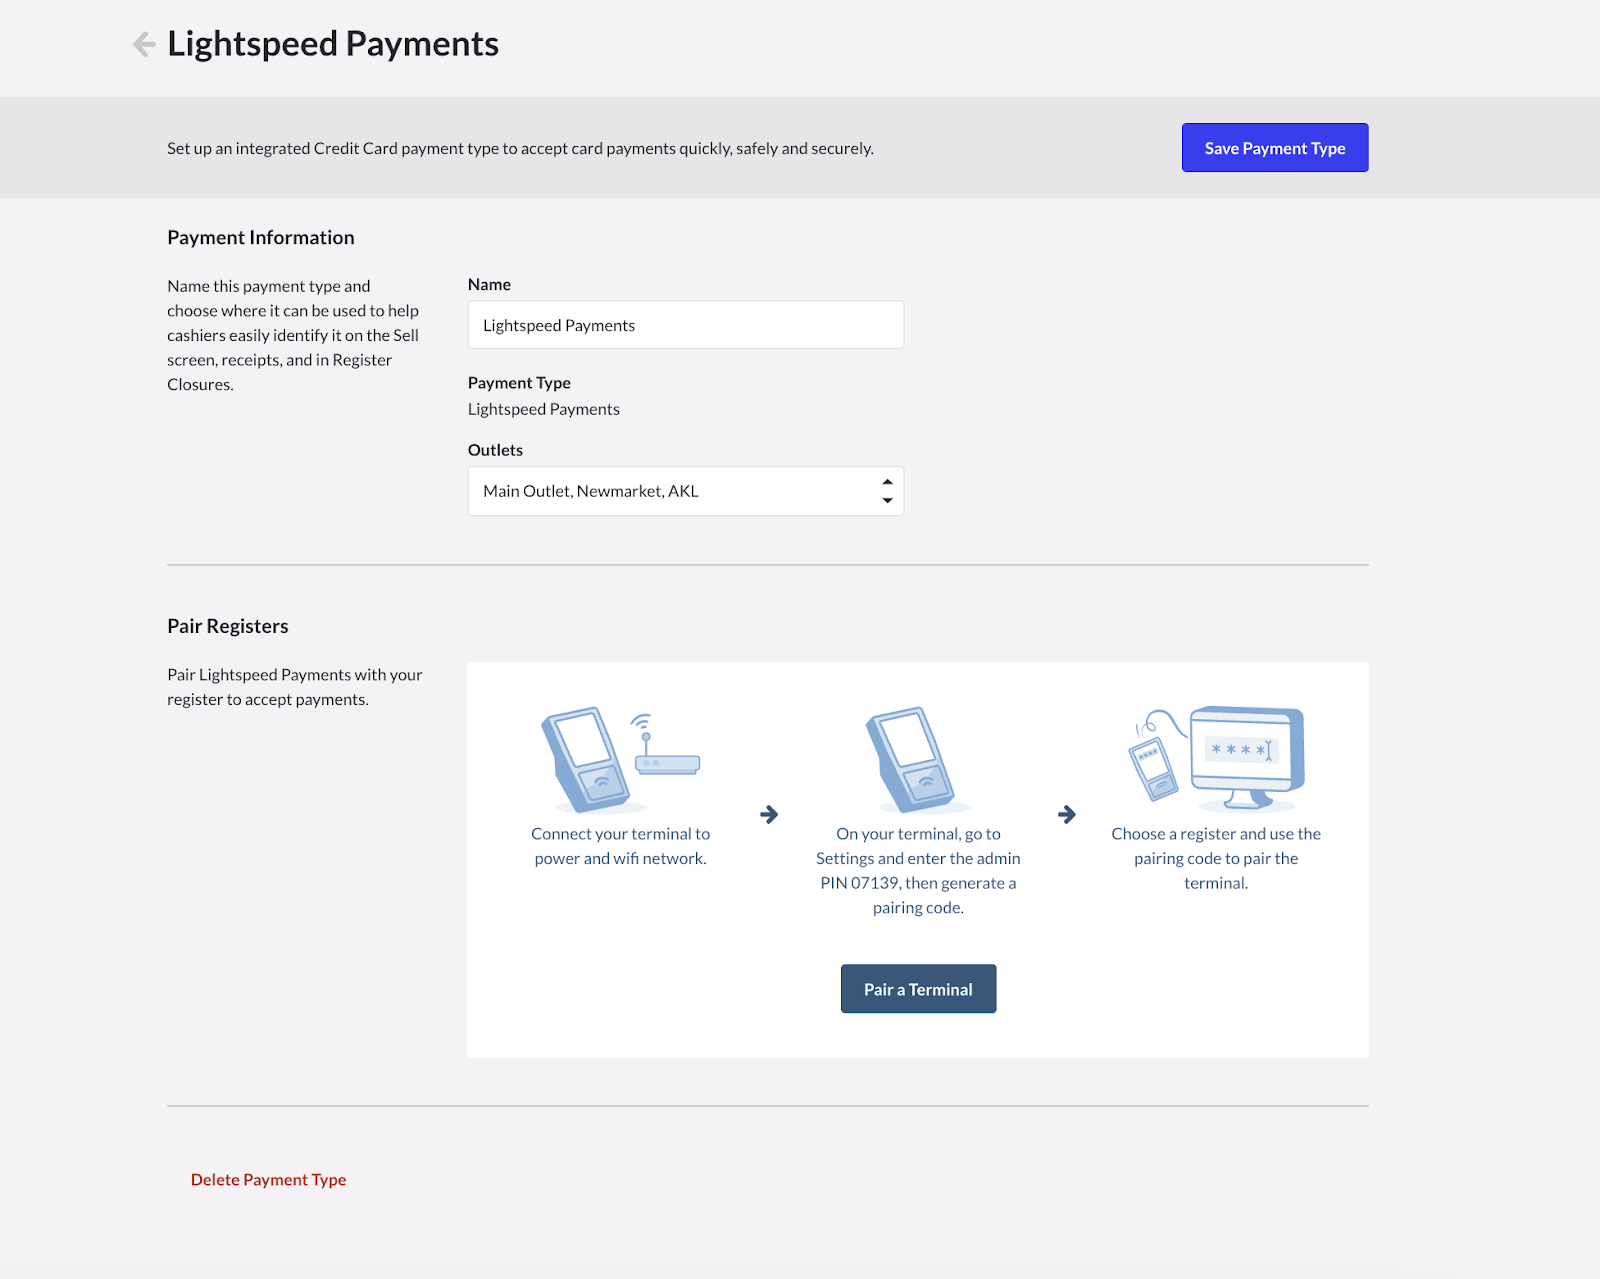 The Lightspeed Payments setup page in Retail POS